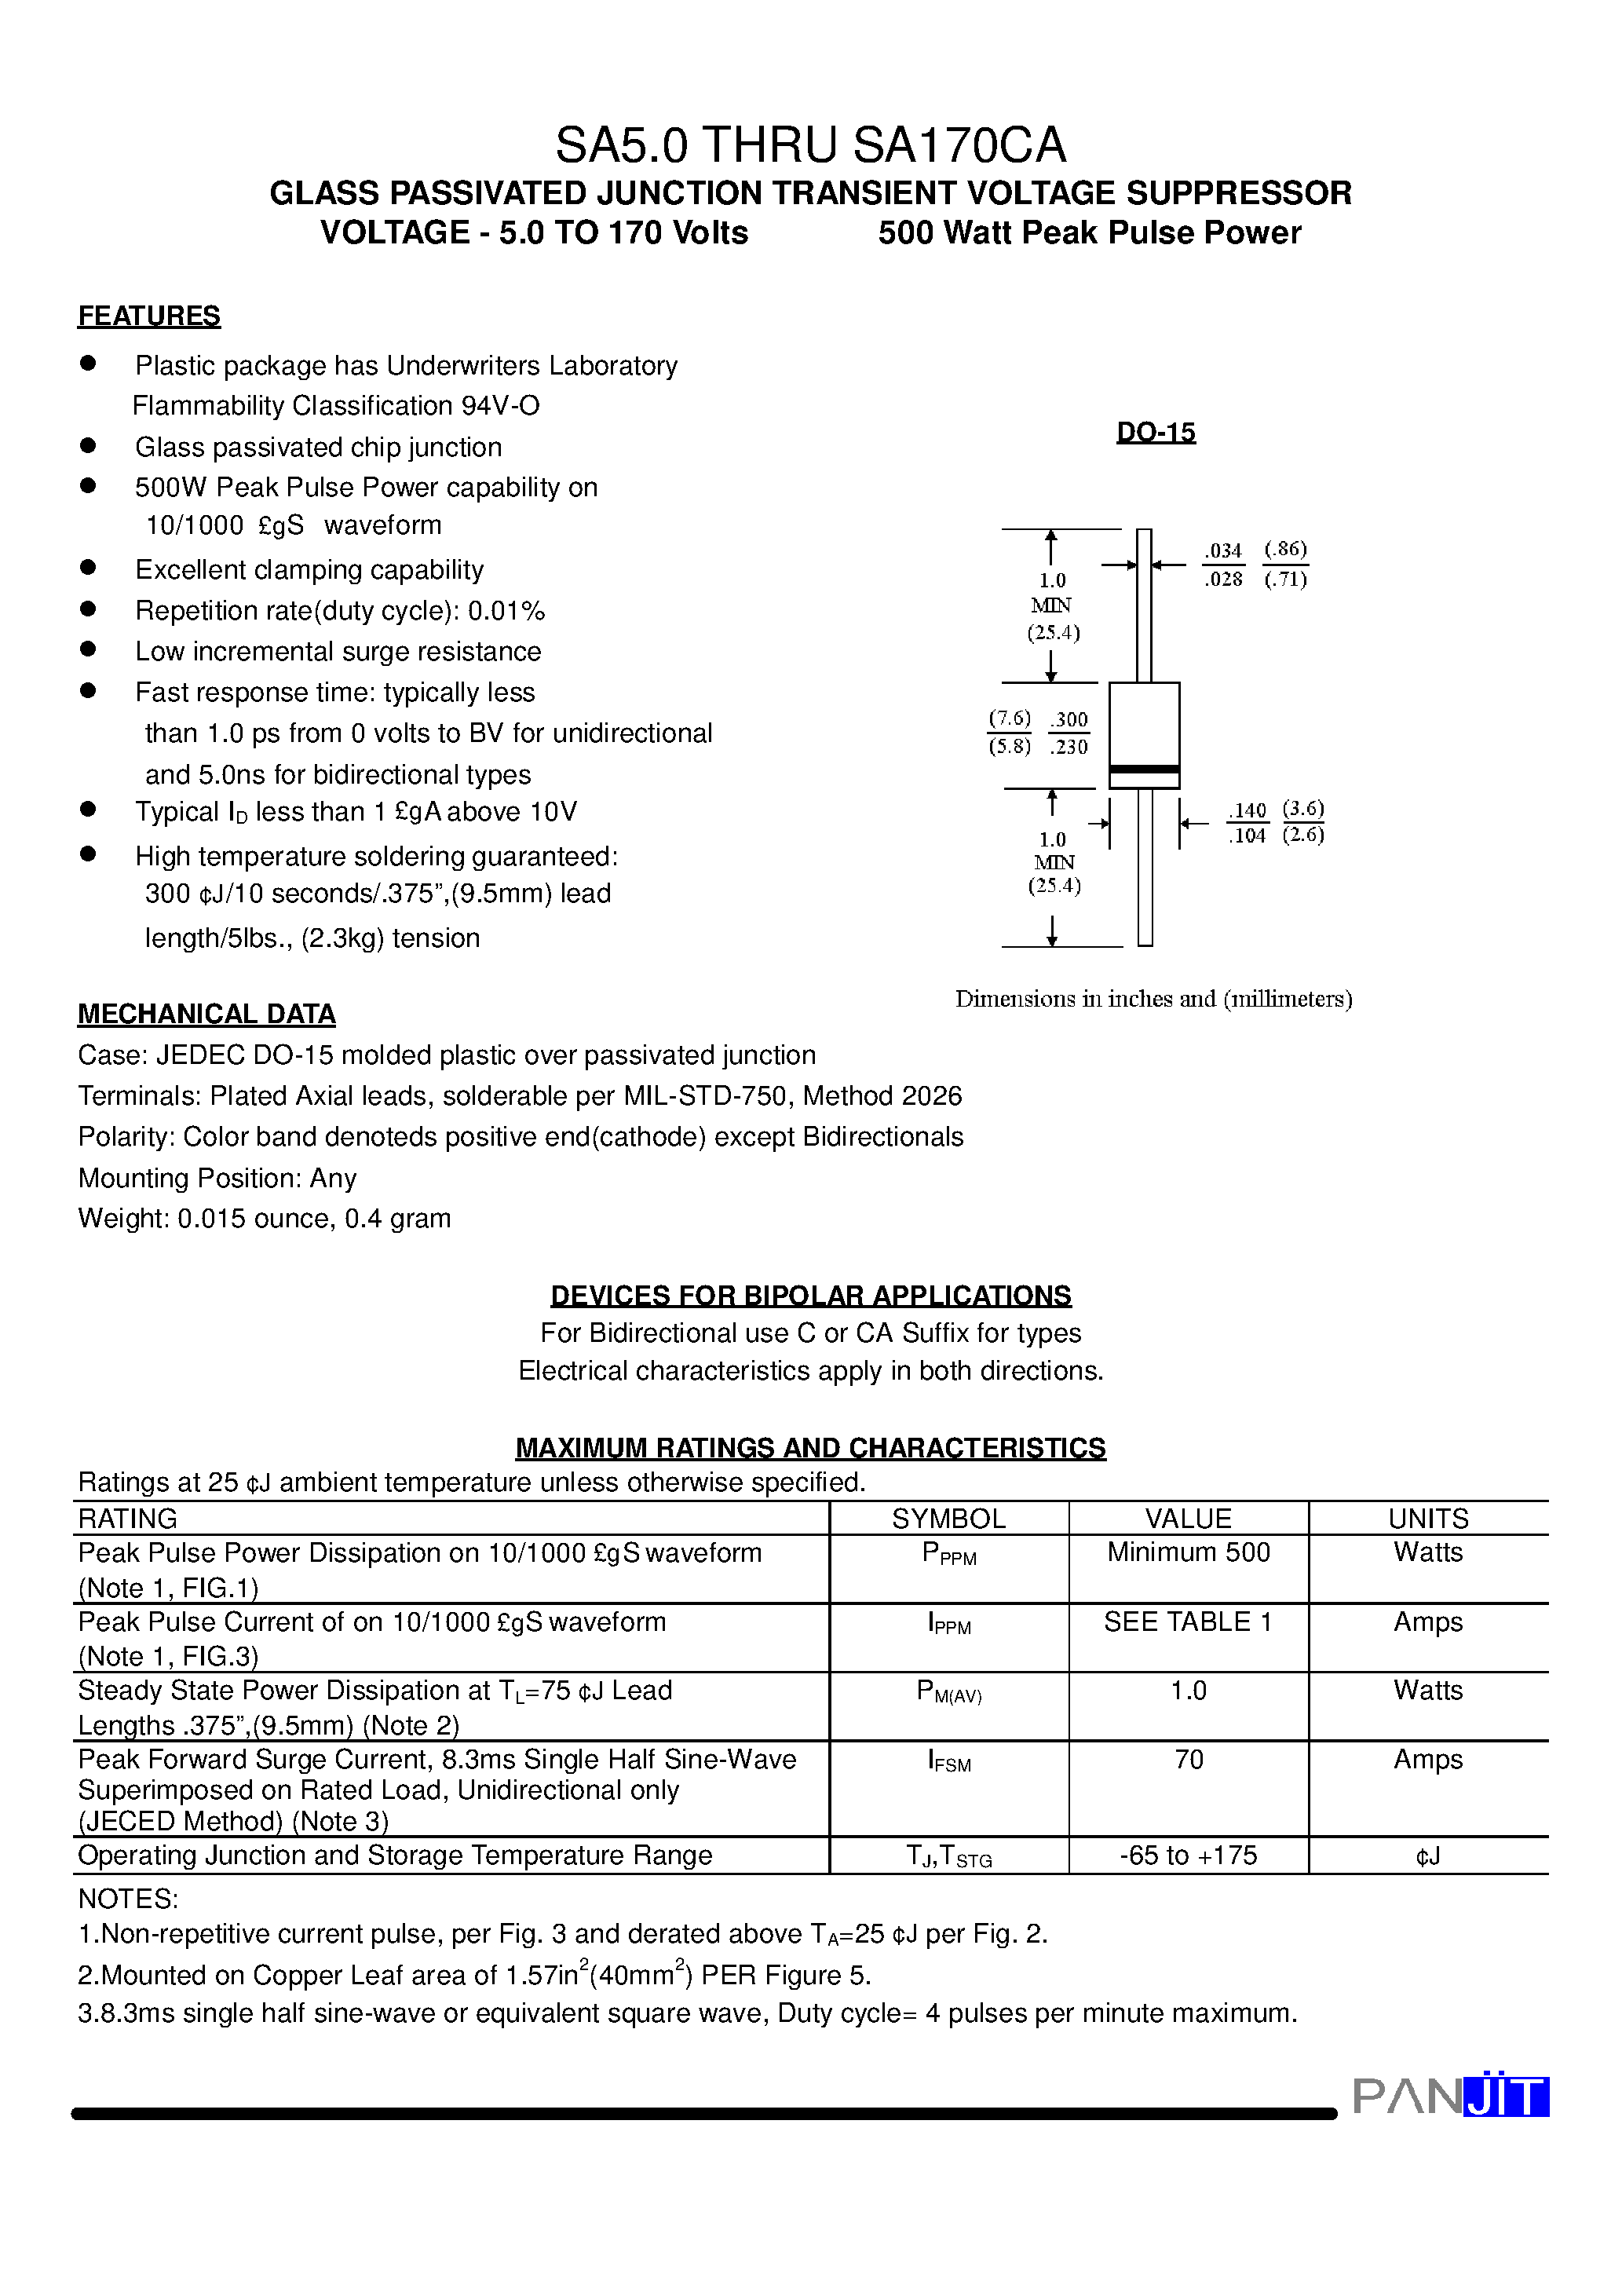 Datasheet SA33A - GLASS PASSIVATED JUNCTION TRANSIENT VOLTAGE SUPPRESSOR(VOLTAGE - 5.0 TO 170 Volts 500 Watt Peak Pulse Power) page 1